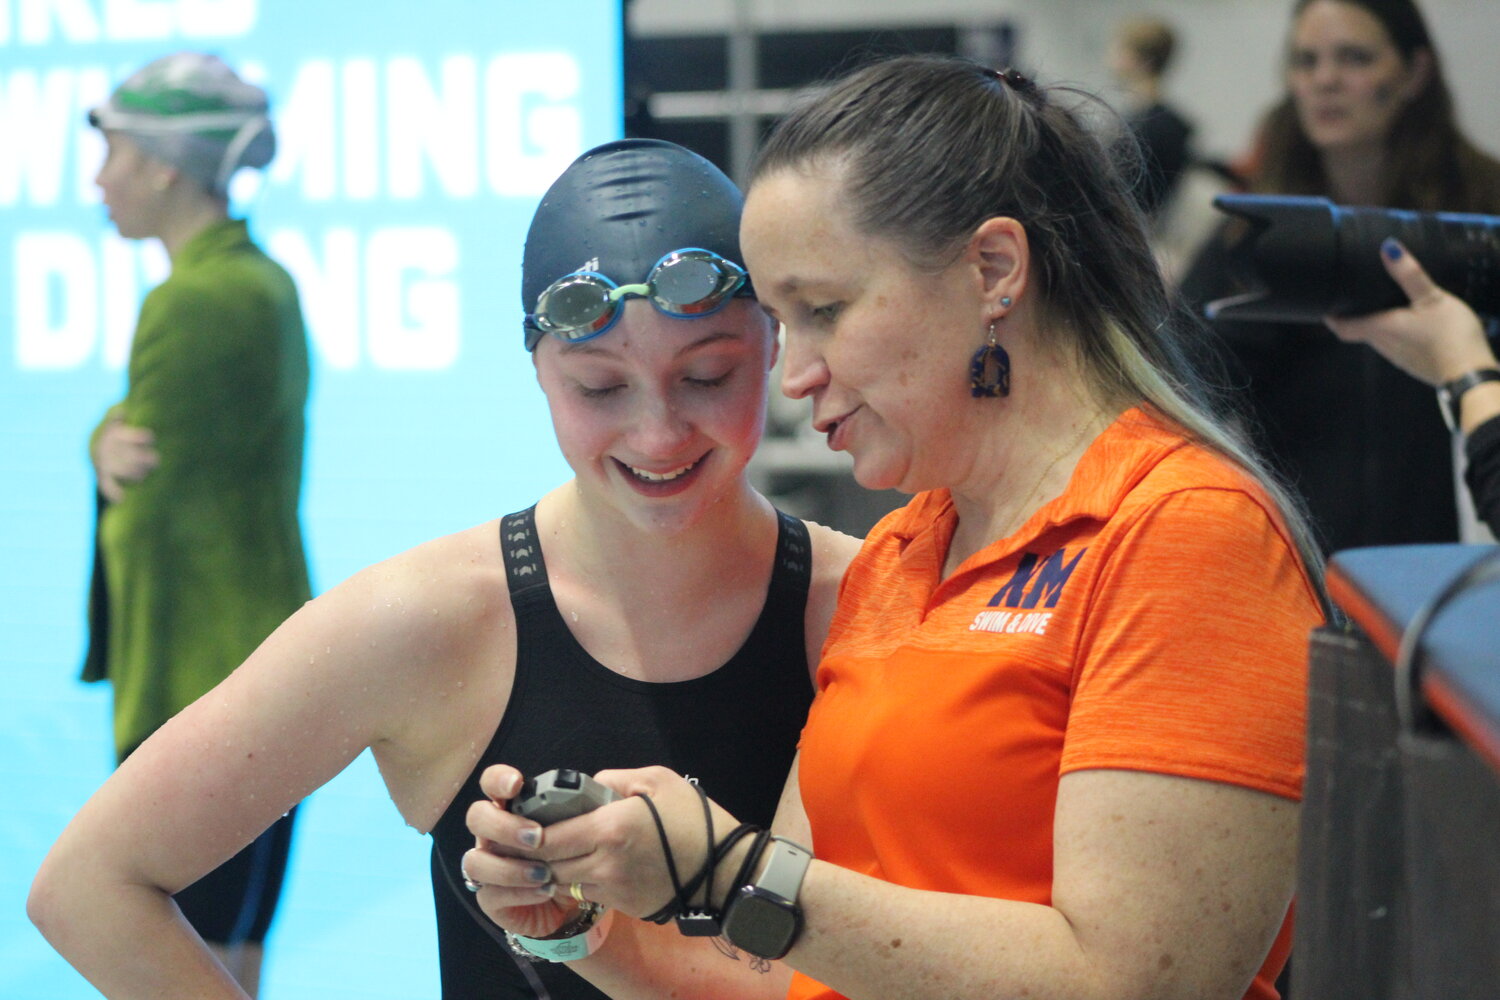 North Montgomery coach Erin Yeager and sophomore Kylie Sankey are both all smiles after Sankey competed in the 200 freestyle.